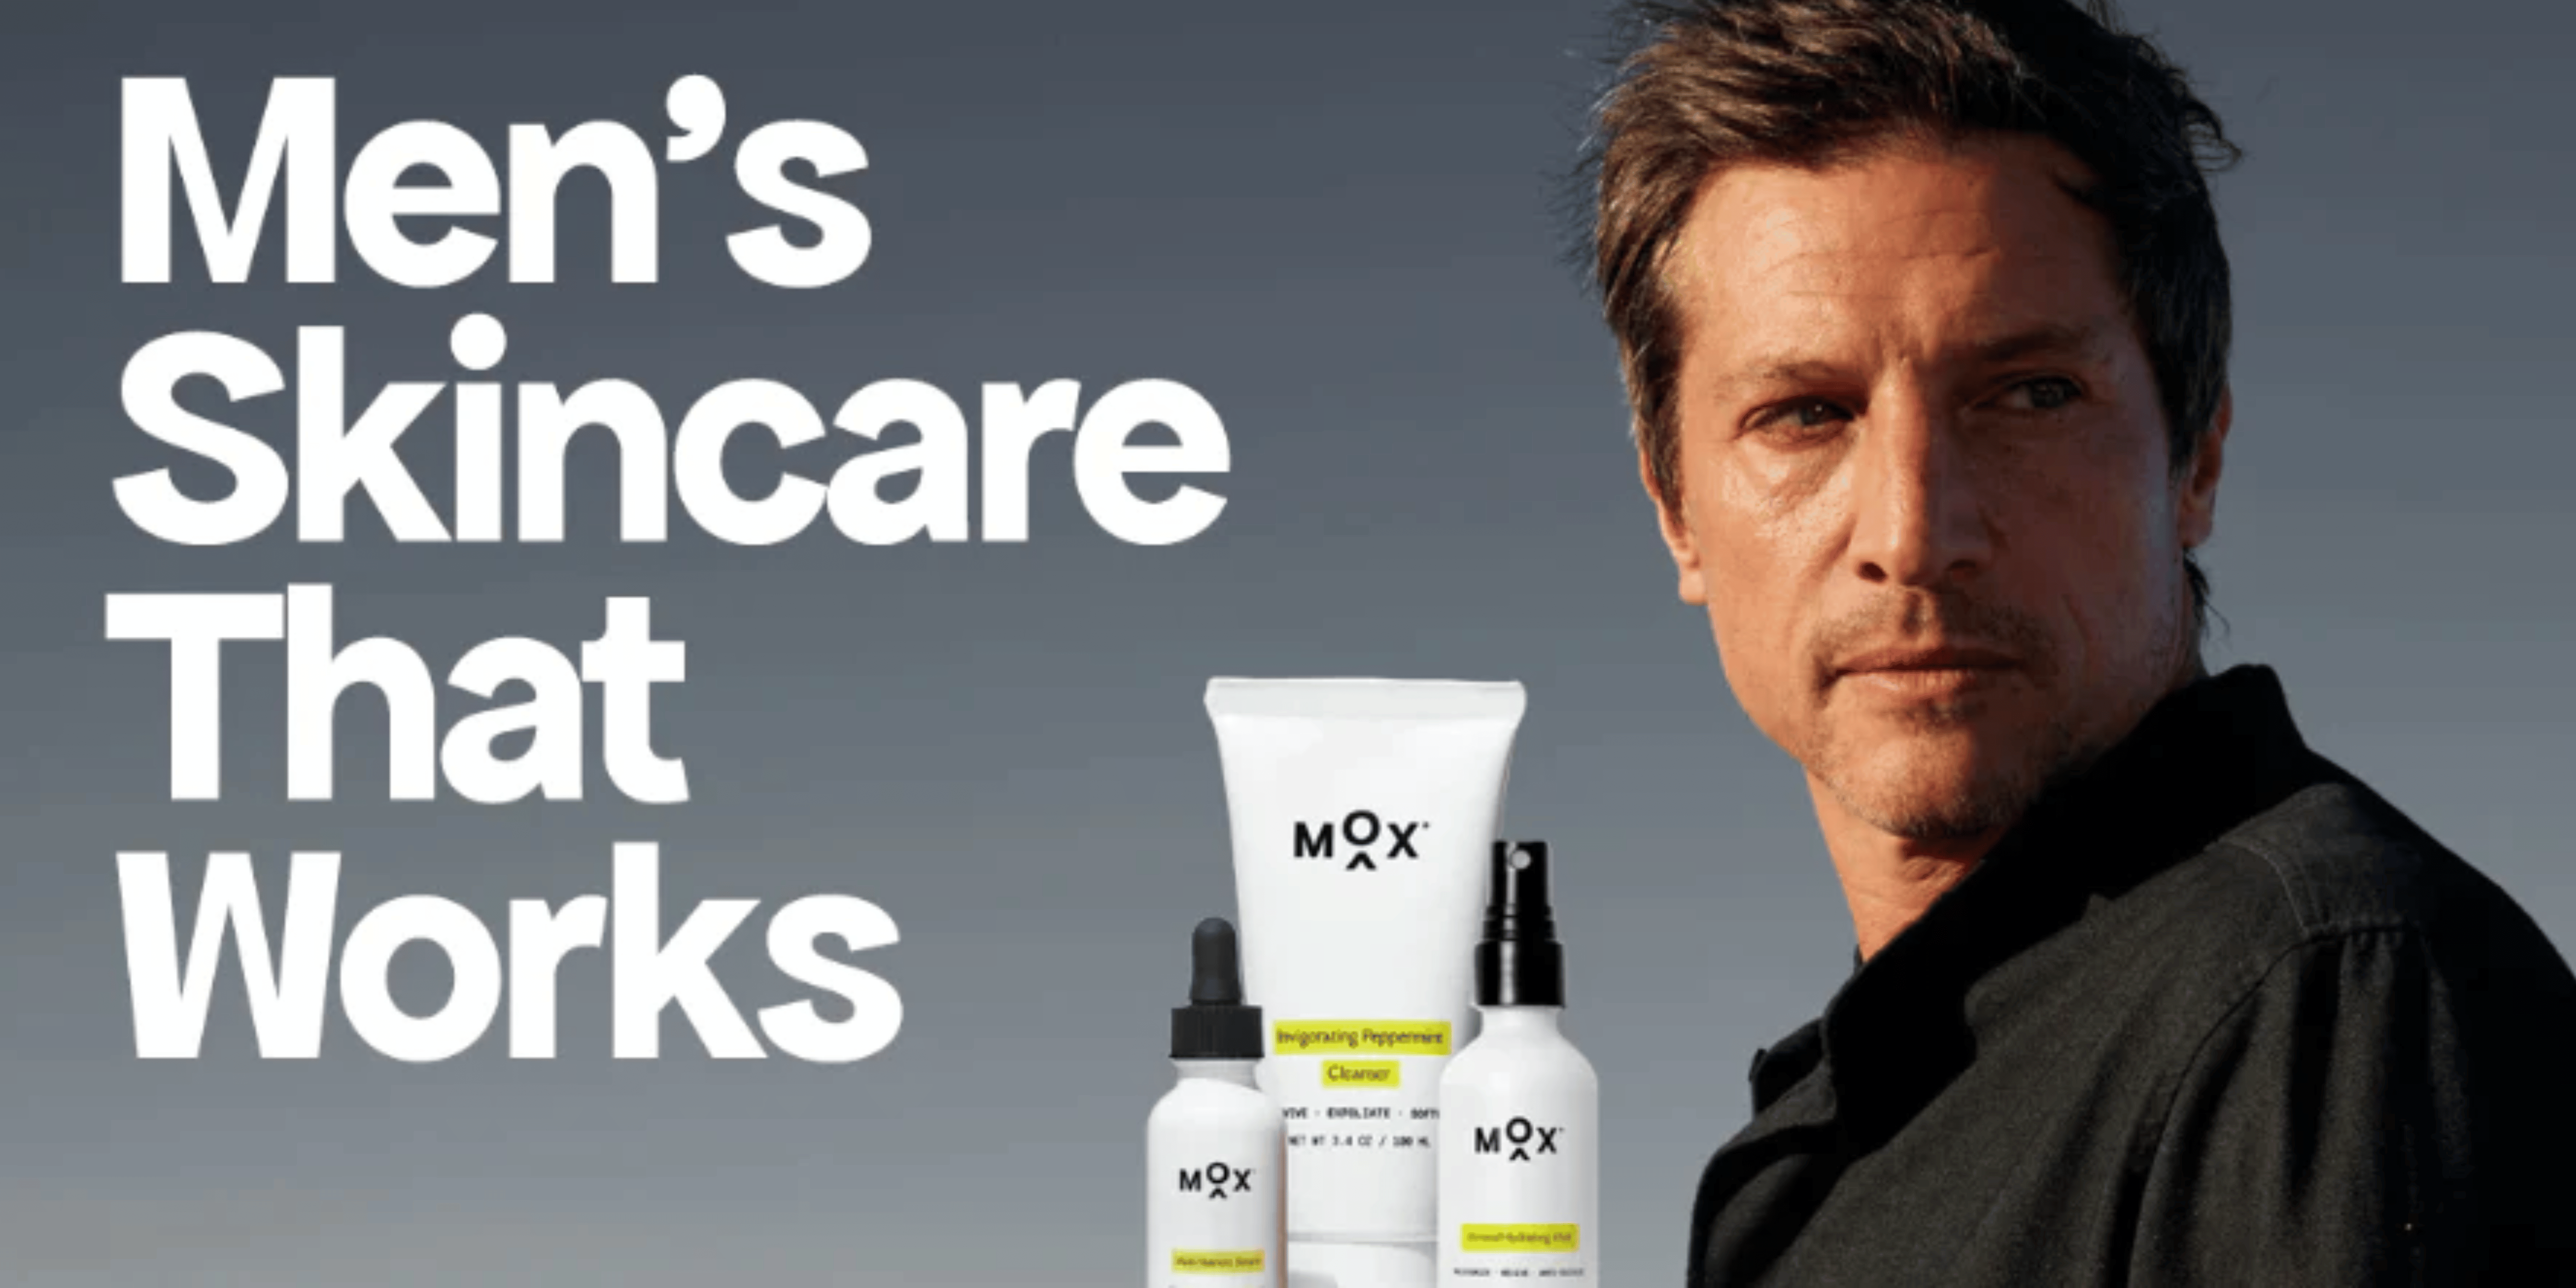 Is it good to wash your face with cold water? Introducing MOX's co-founder, Simon Rex.